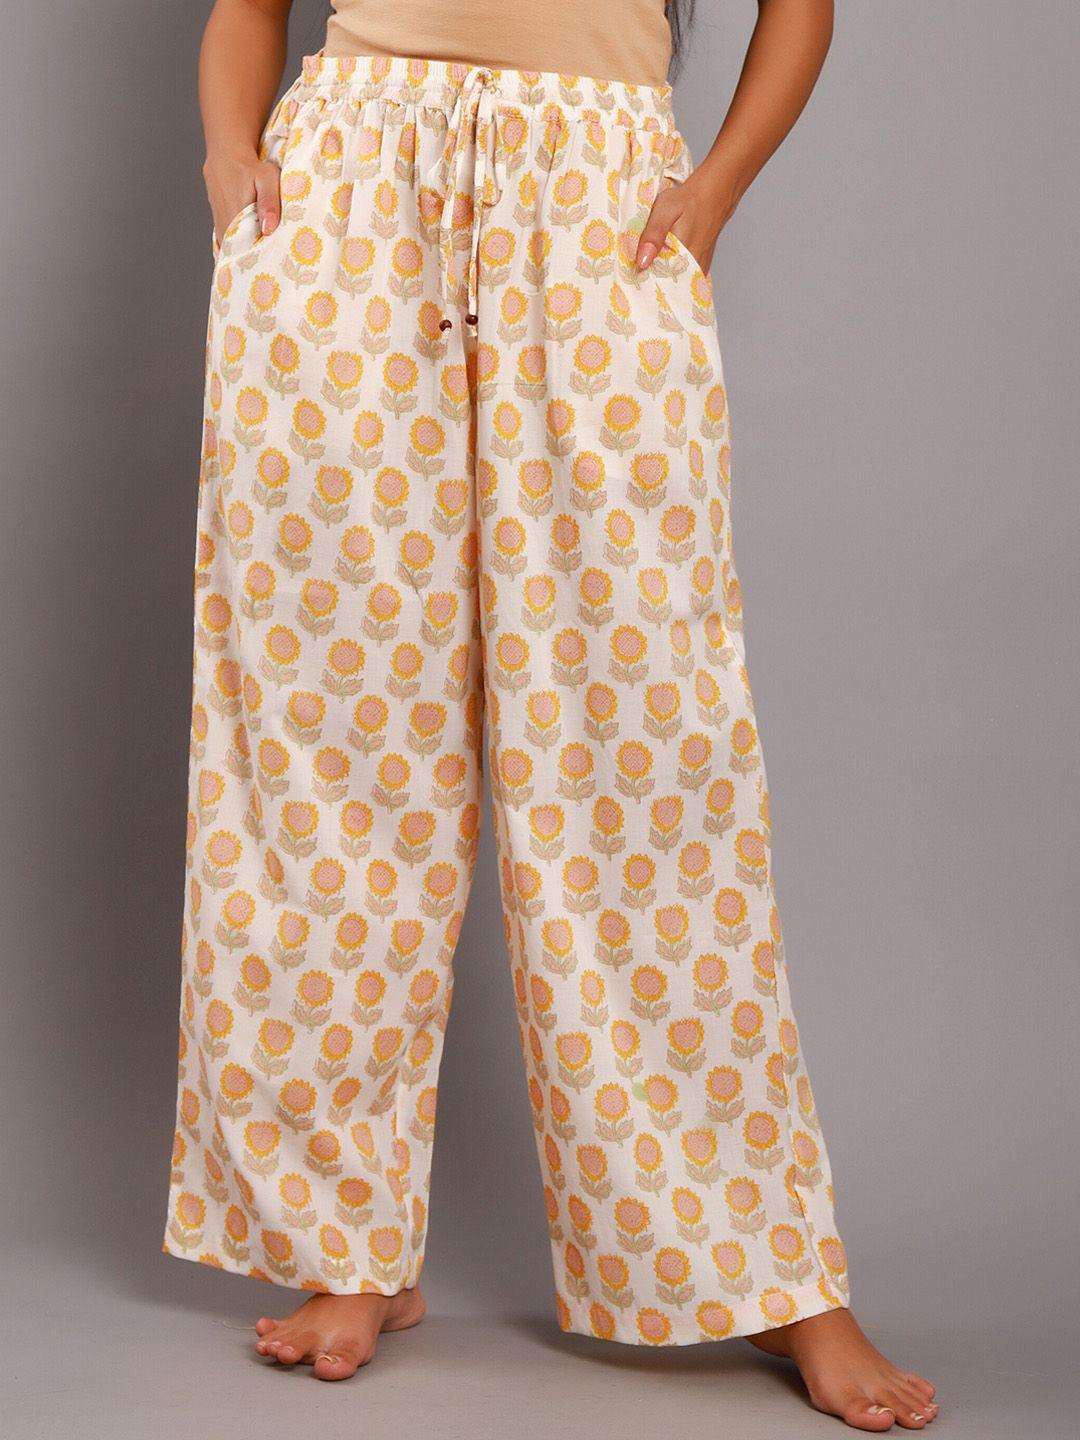 gauranche floral printed lounge pants